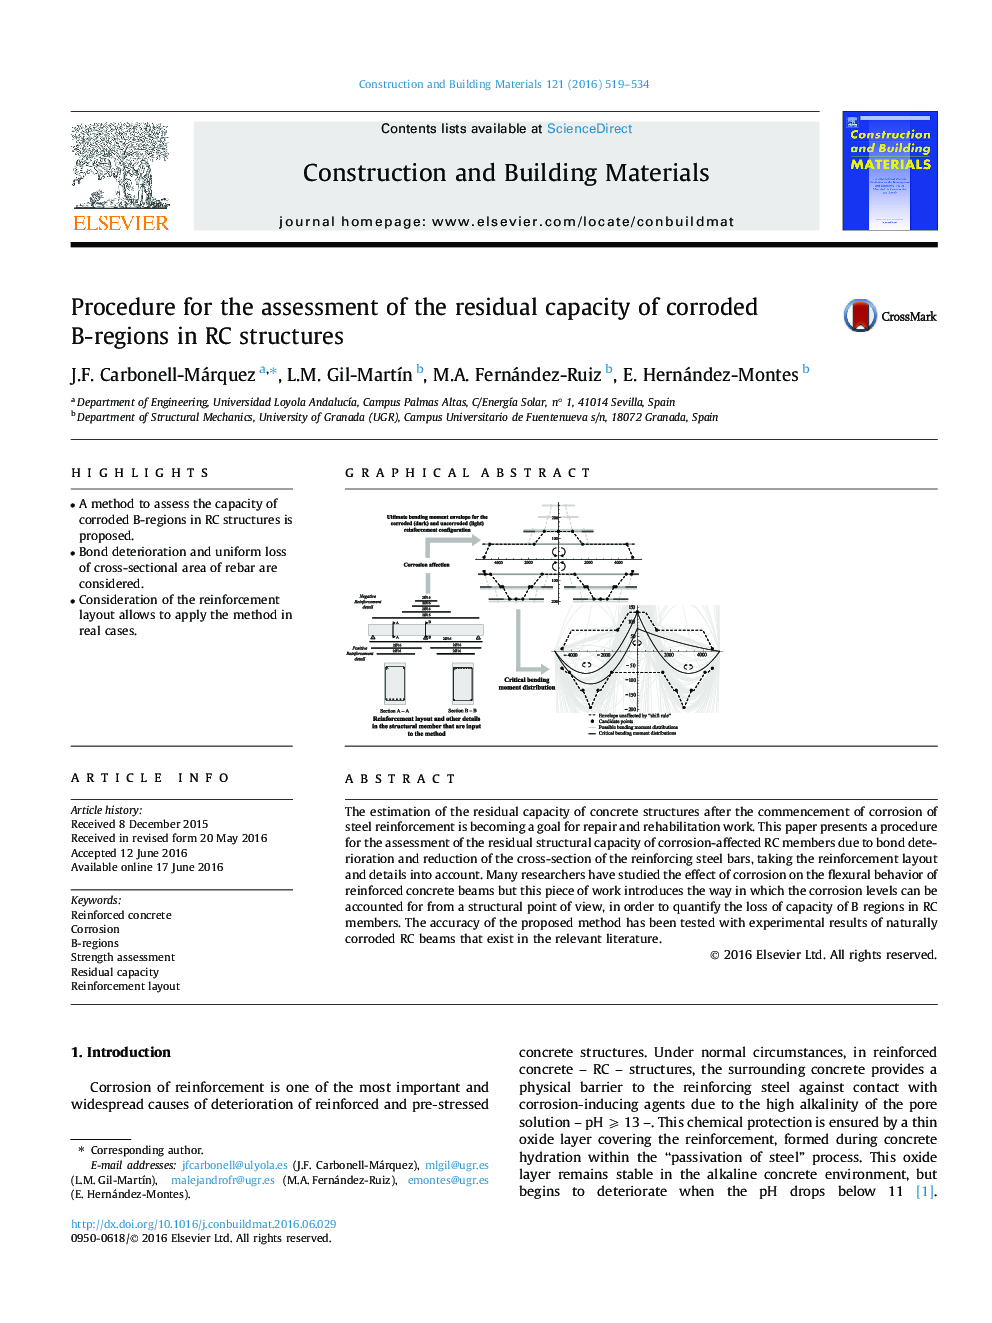 Procedure for the assessment of the residual capacity of corroded B-regions in RC structures